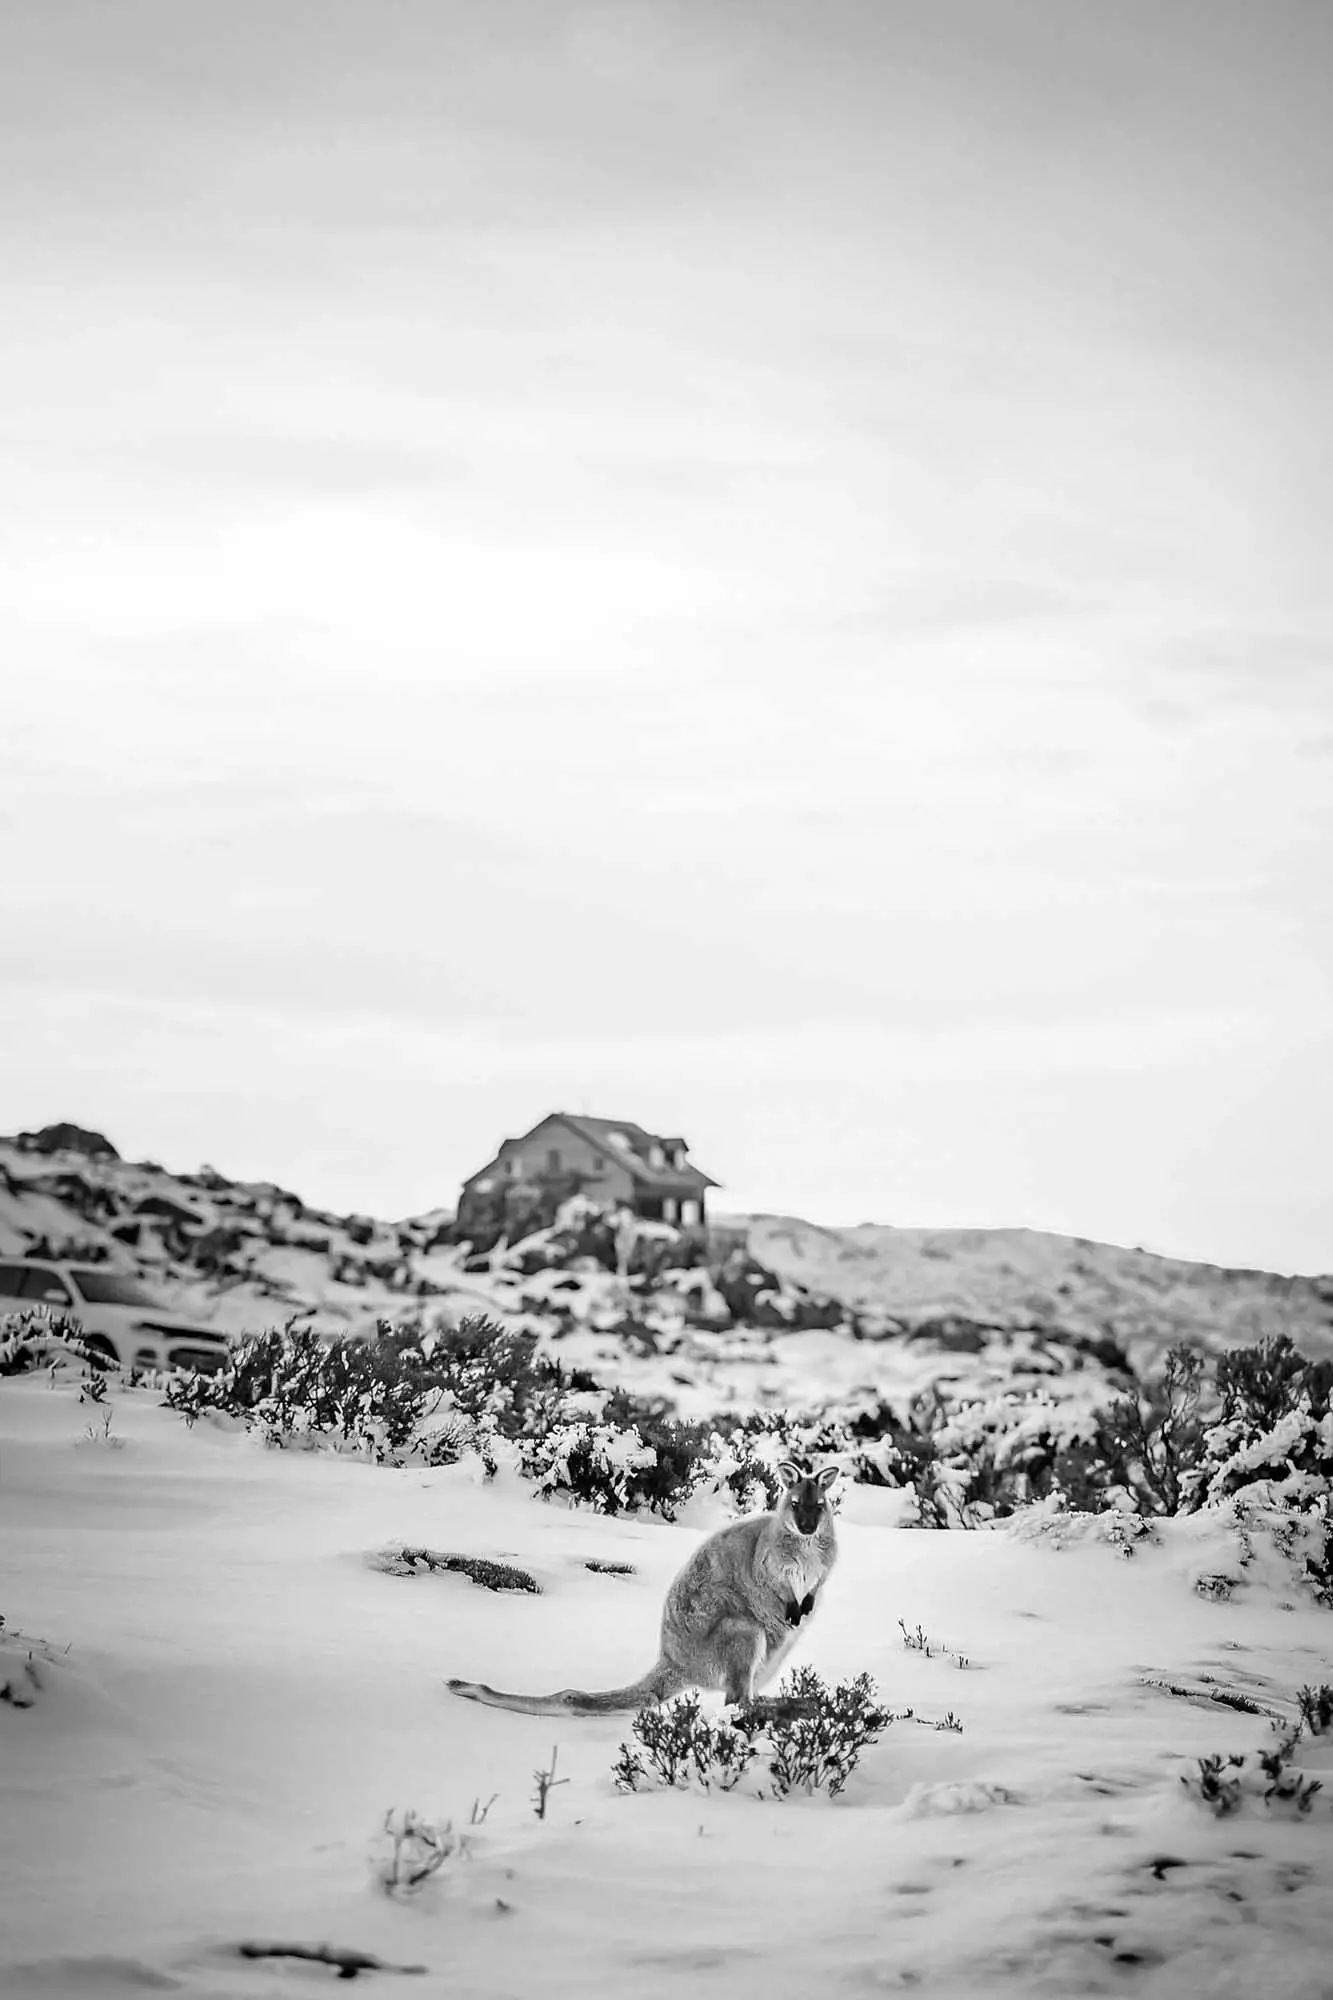 A small light-furred wallaby stands on a slopping hill covered in snow. 